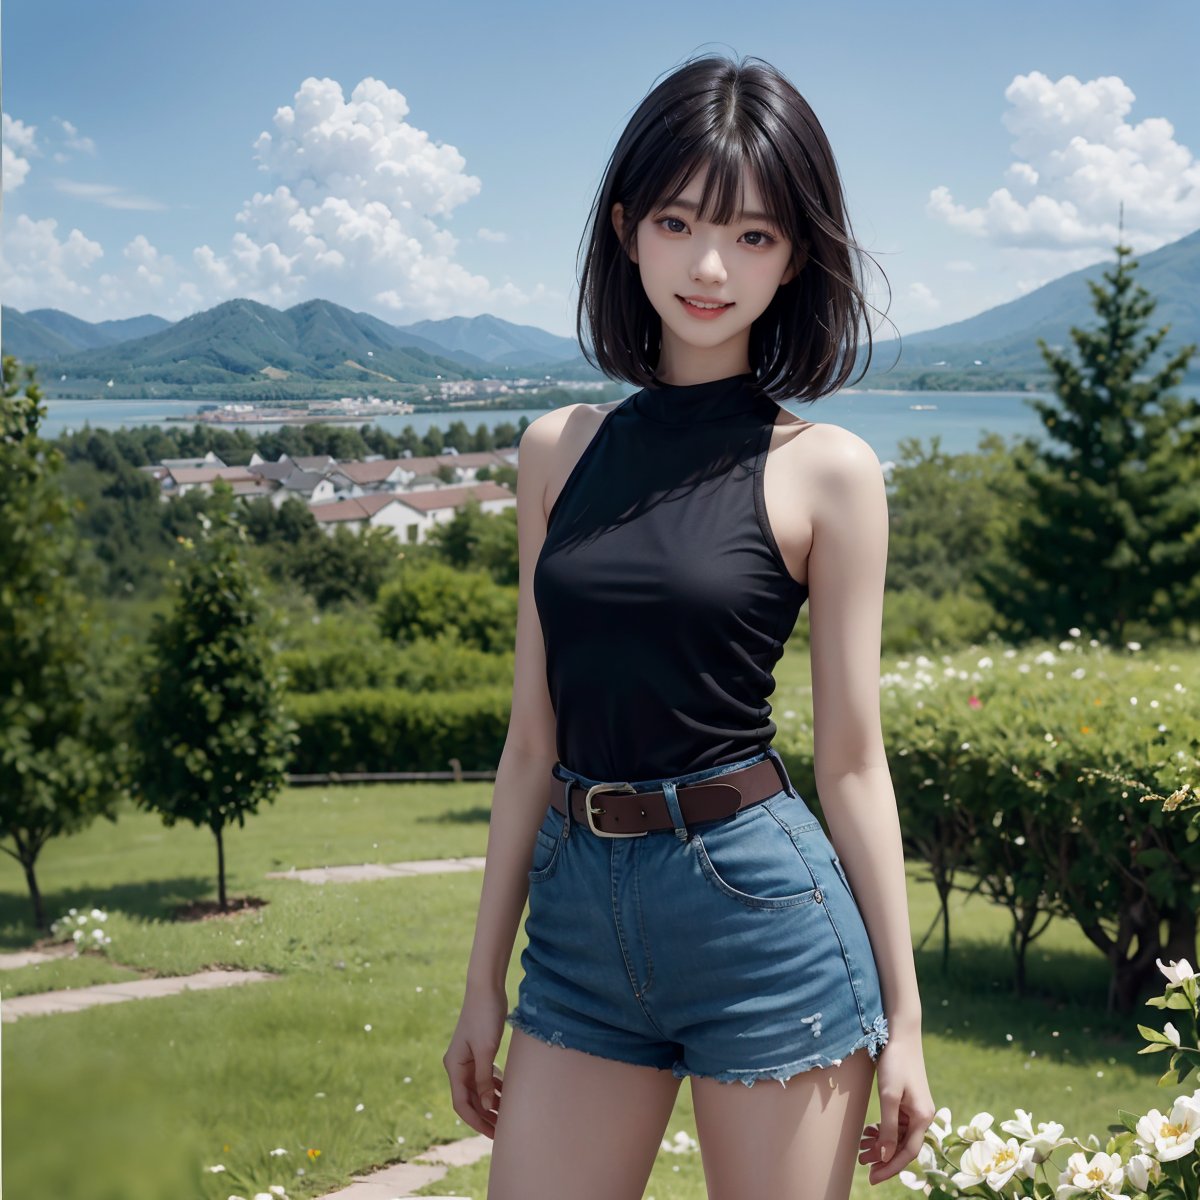 Fractal art that is mesmerizing and visually stunning. Official art. Masterpiece. 4K high resolution rendering. One Japanese girl. 17 years old. Black hair (straight, shoulder-length, bangs). Black eyes. Round jaw, small mouth. Low stature, small breasts, beautiful legs. Smile.
Tanktop. Shorts, belt. She is standing on a hill. View, White flowers, village and forest in the distance, blue sky. Solo. Cowboy_shot.